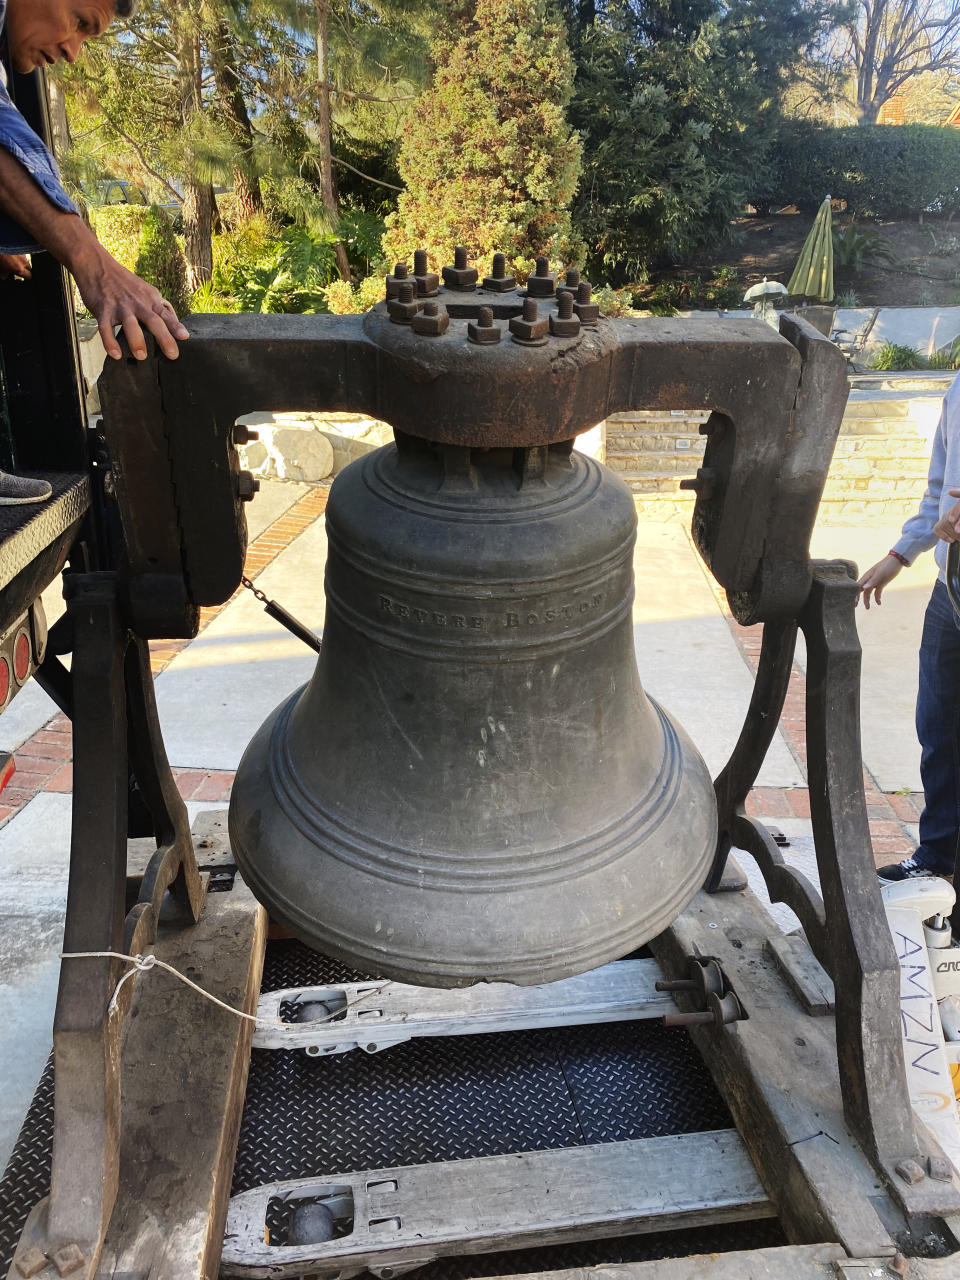 In this handout photograph provided by Amy Miller, a bronze bell forged in 1834 by Paul Revere's son, Joseph Warren Revere, is loaded on a forklift in Chino Hills, Calif., on Feb. 8, 2022, for transport to the Paul Revere Heritage Site in Canton, Massachusetts. Amy Miller, the daughter of the California couple who acquired the bell in 1984, says she and her brother donated it to the museum so the public could view and appreciate it. (Amy Miller photo via AP)